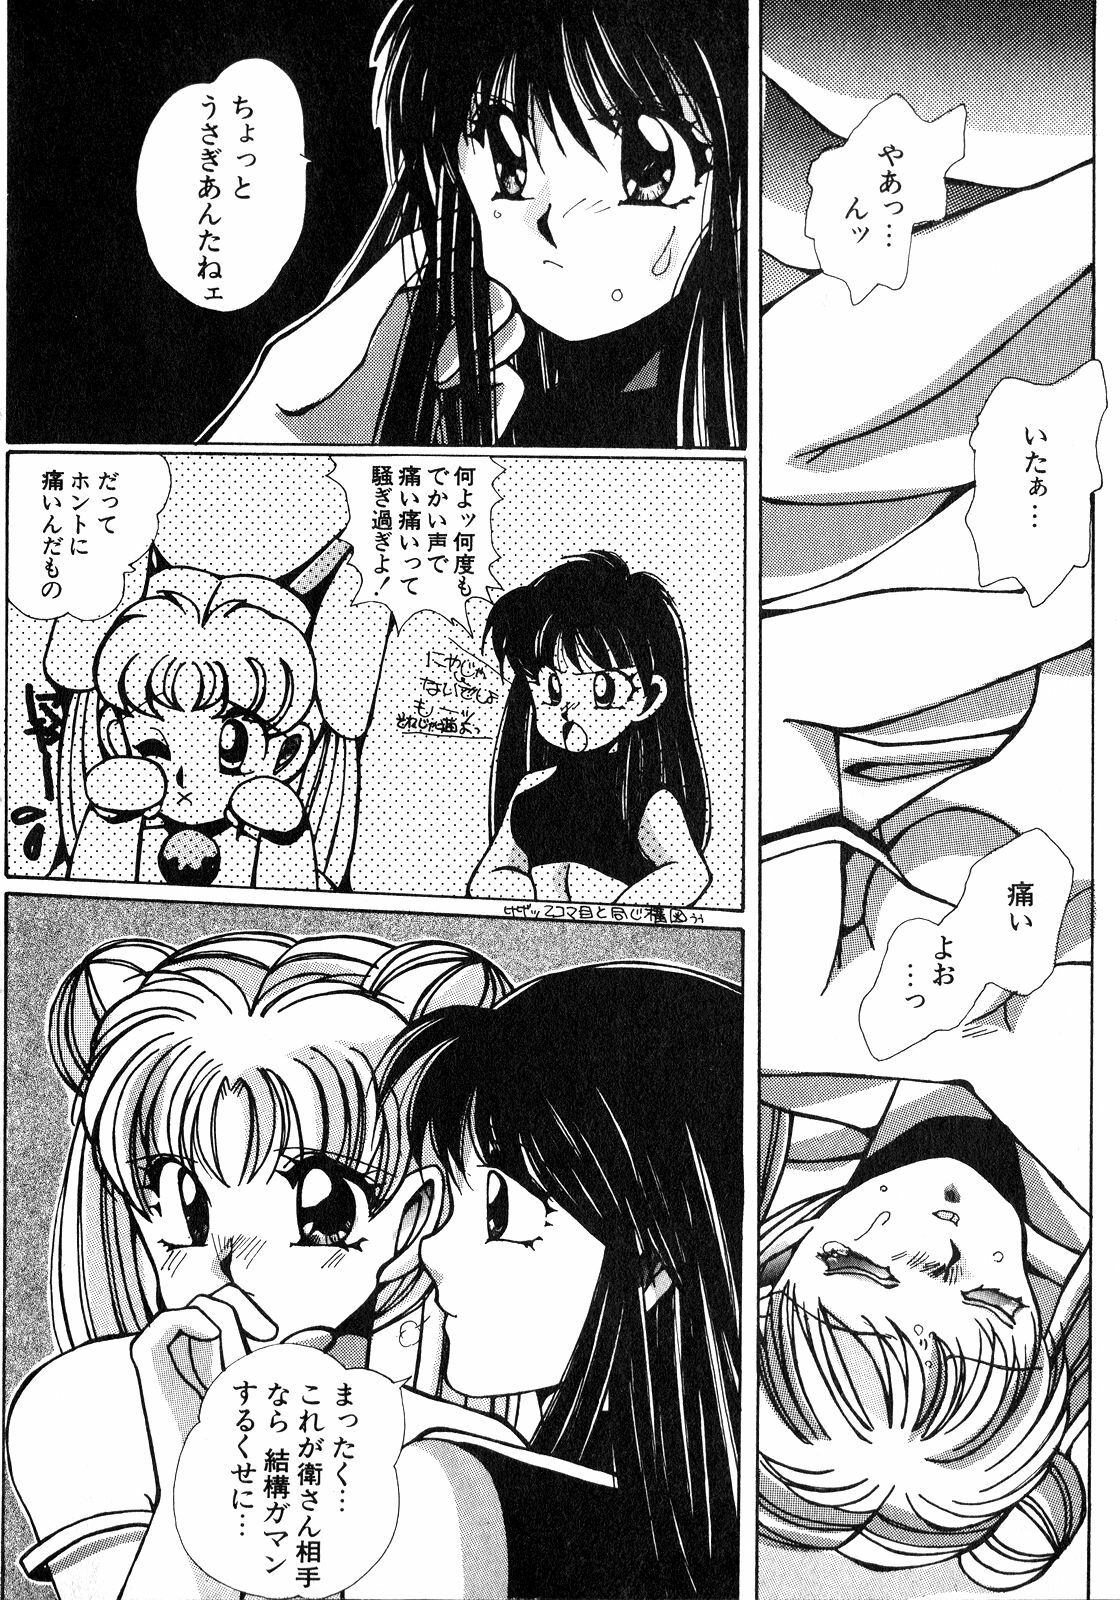 [Anthology] Lunatic Party 8 (Sailor Moon) page 43 full